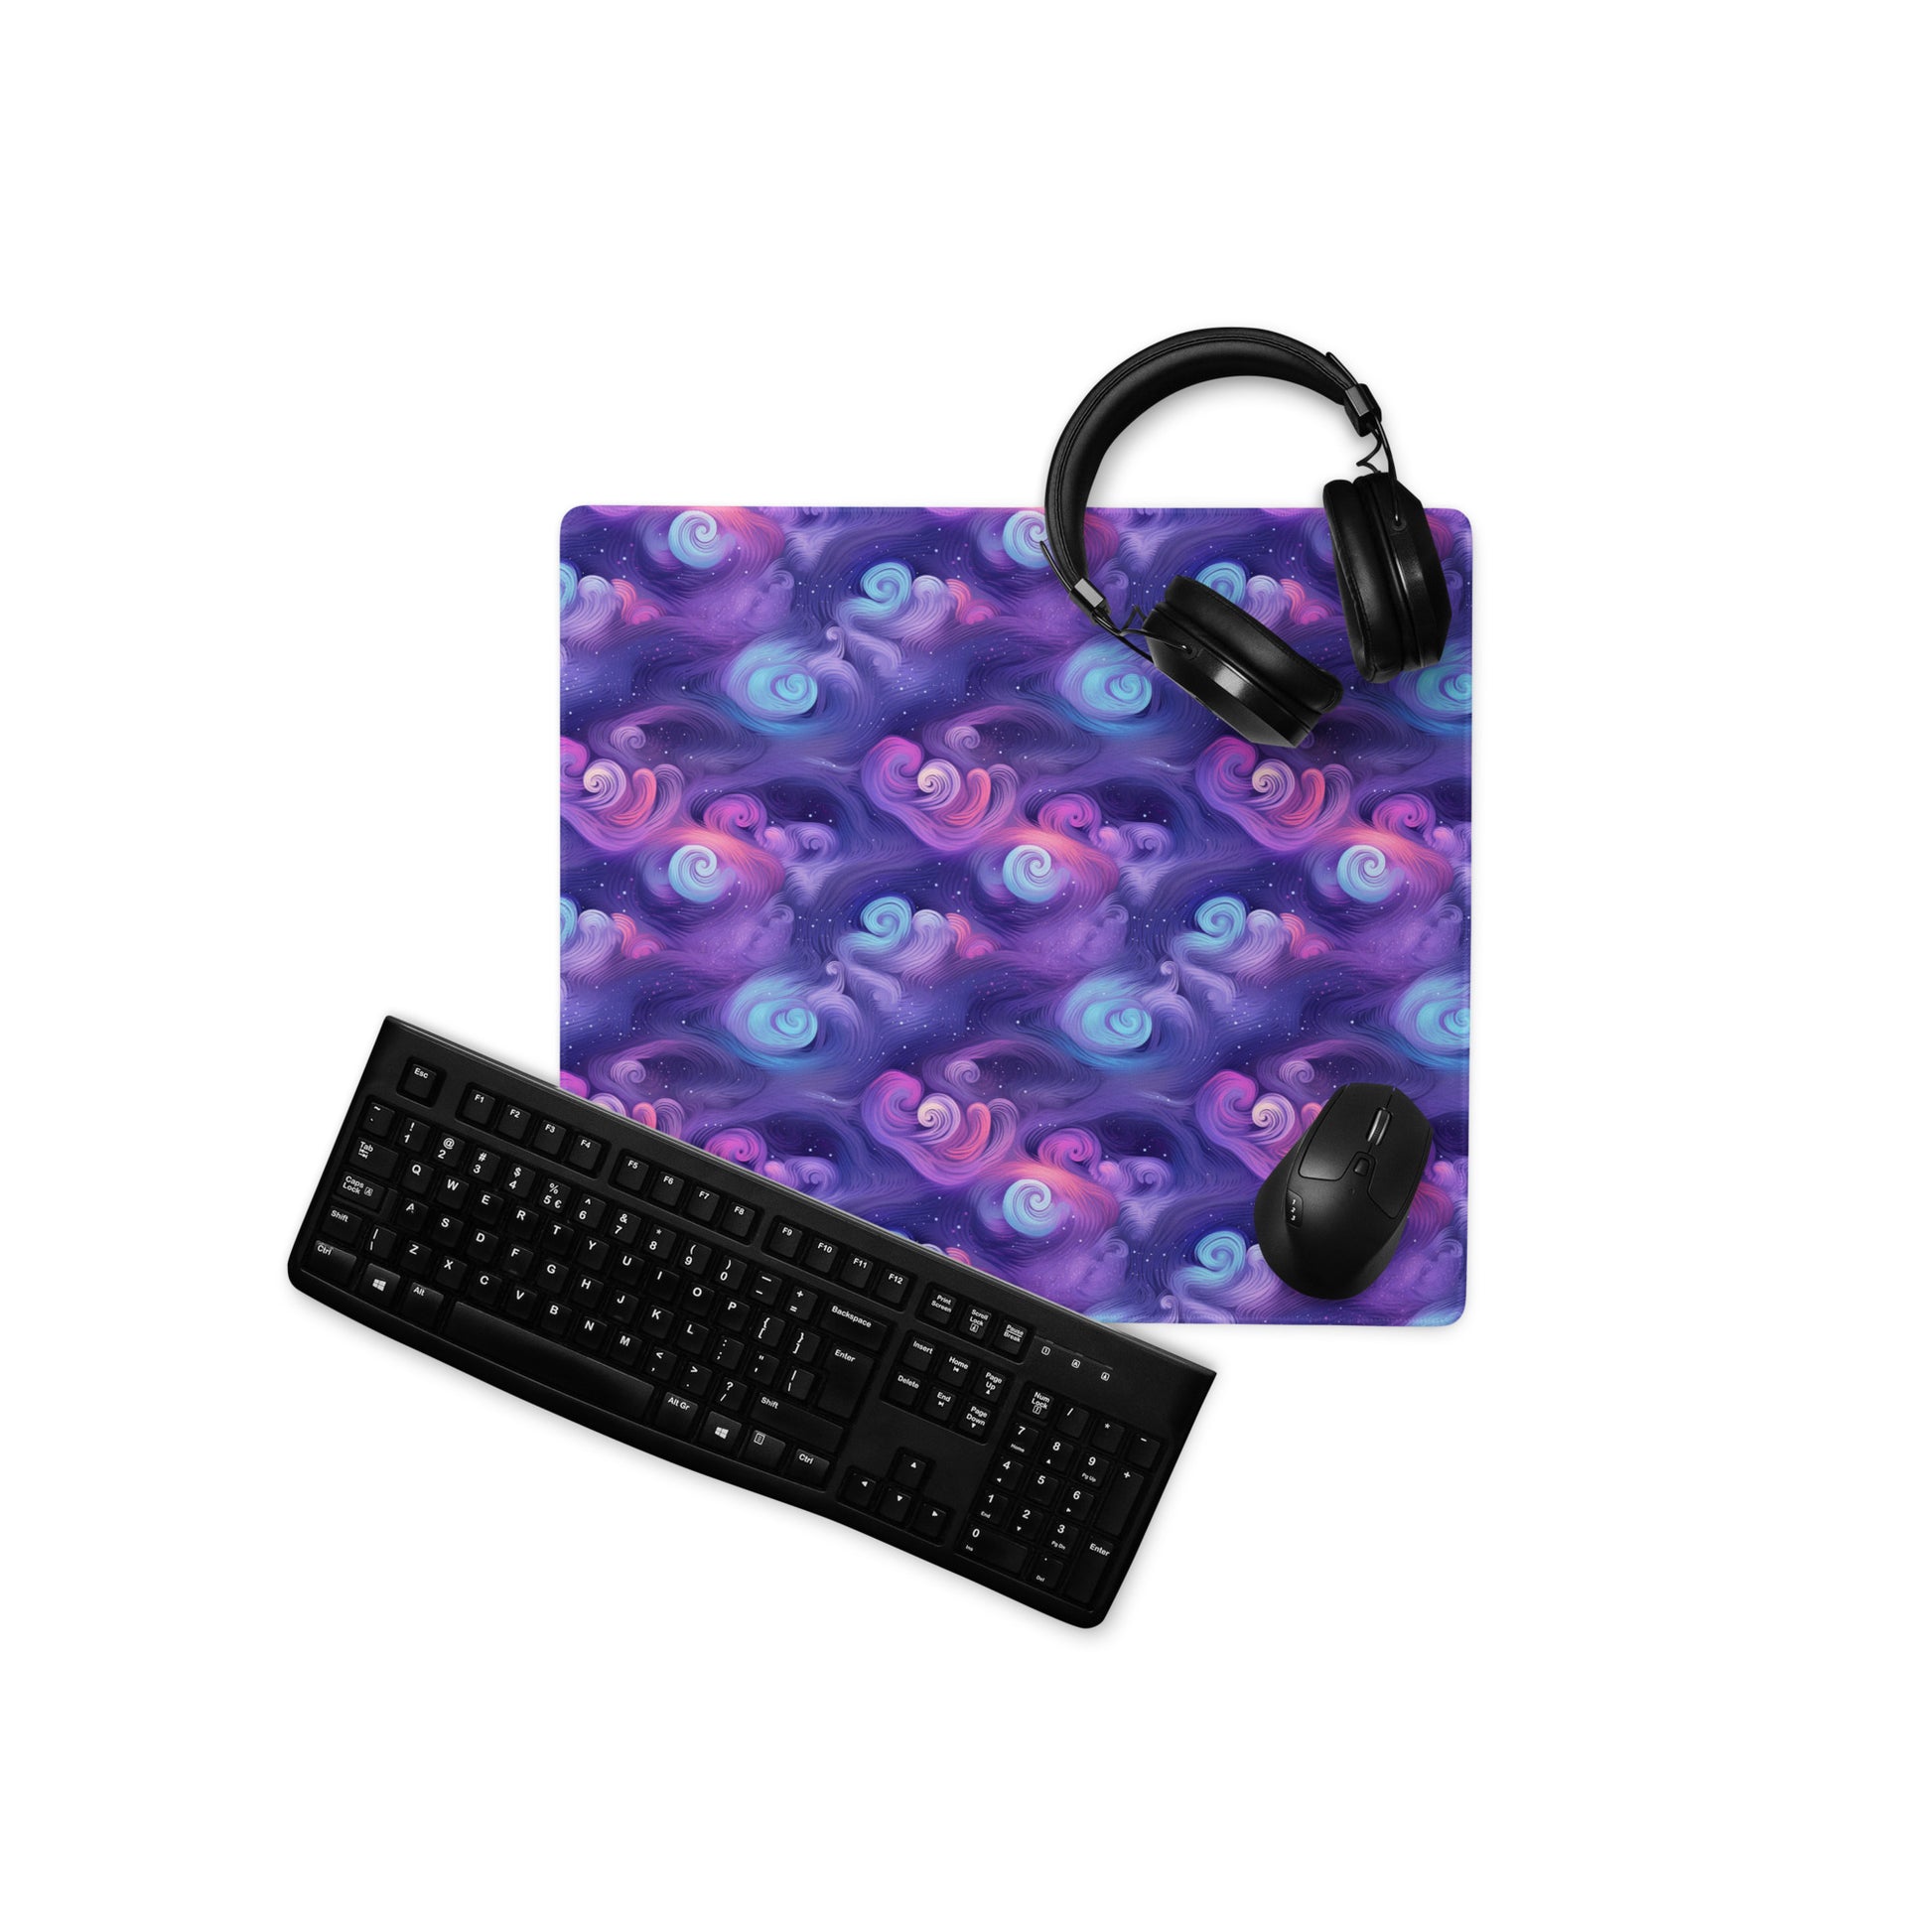 A 18" x 16" desk pad with fluffy clouds and stars on it displayed with a keyboard, headphones and a mouse. Blue and Purple in color